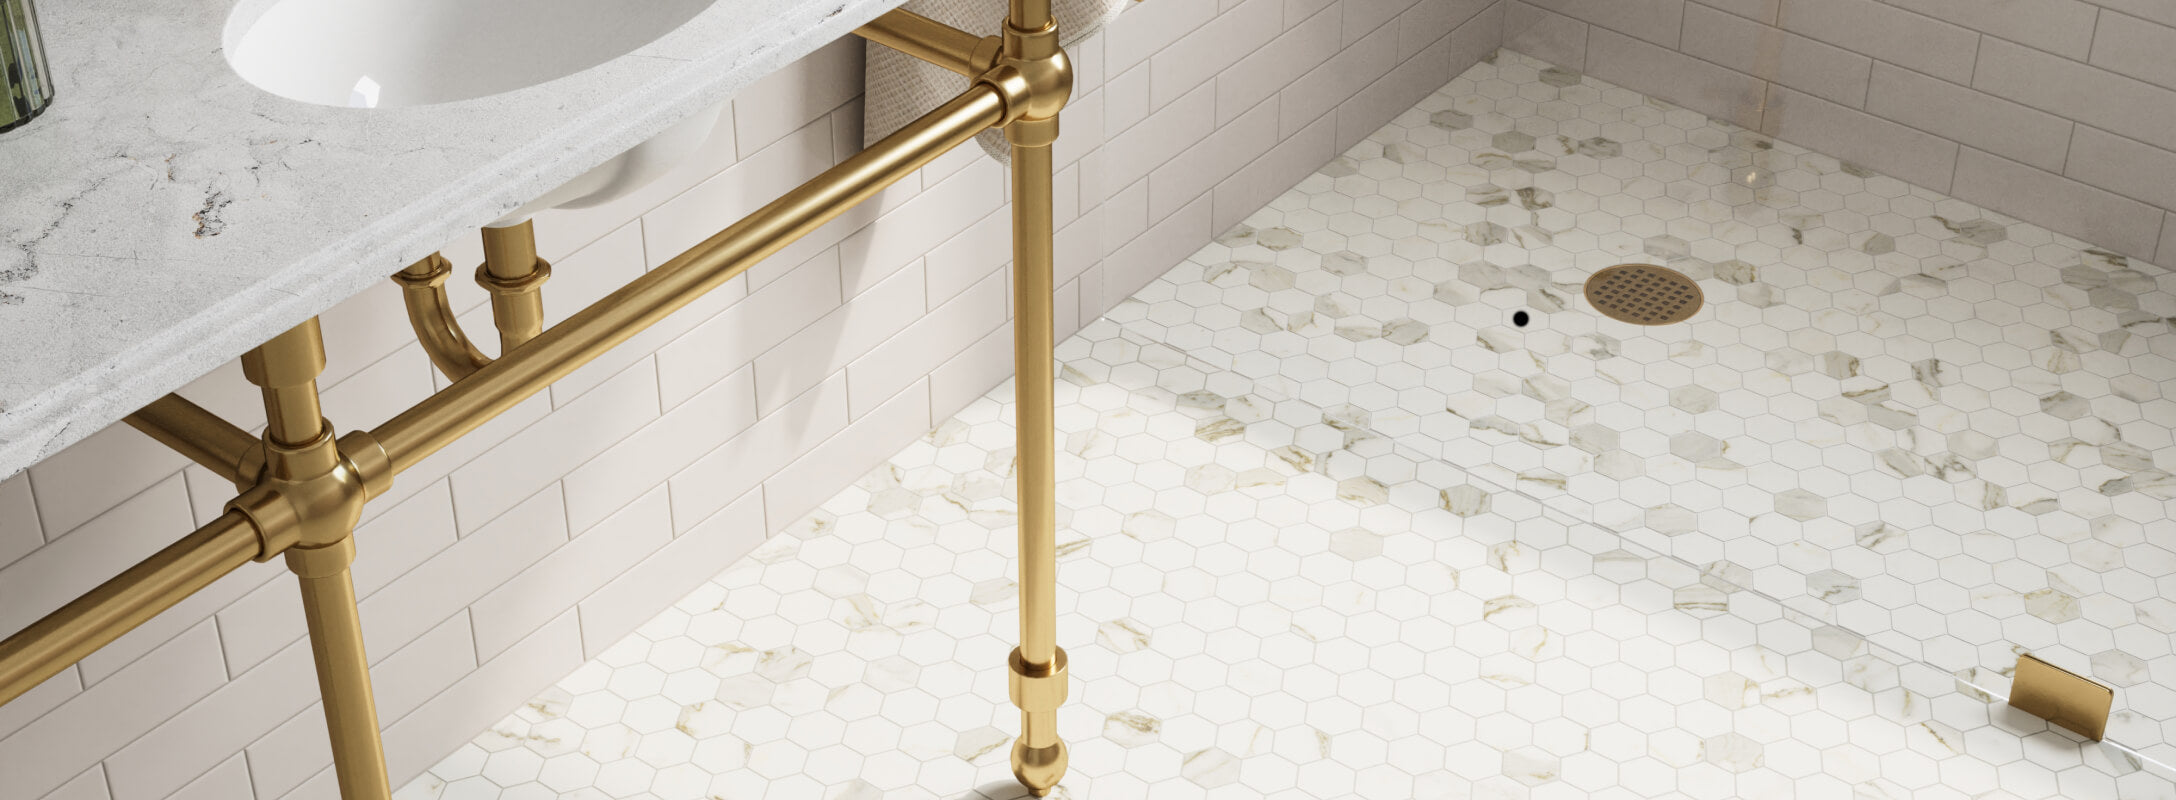 White marble look hexagonal mosaic tiles for a shower floor, paired with gold fixtures for a luxurious and elegant bathroom design